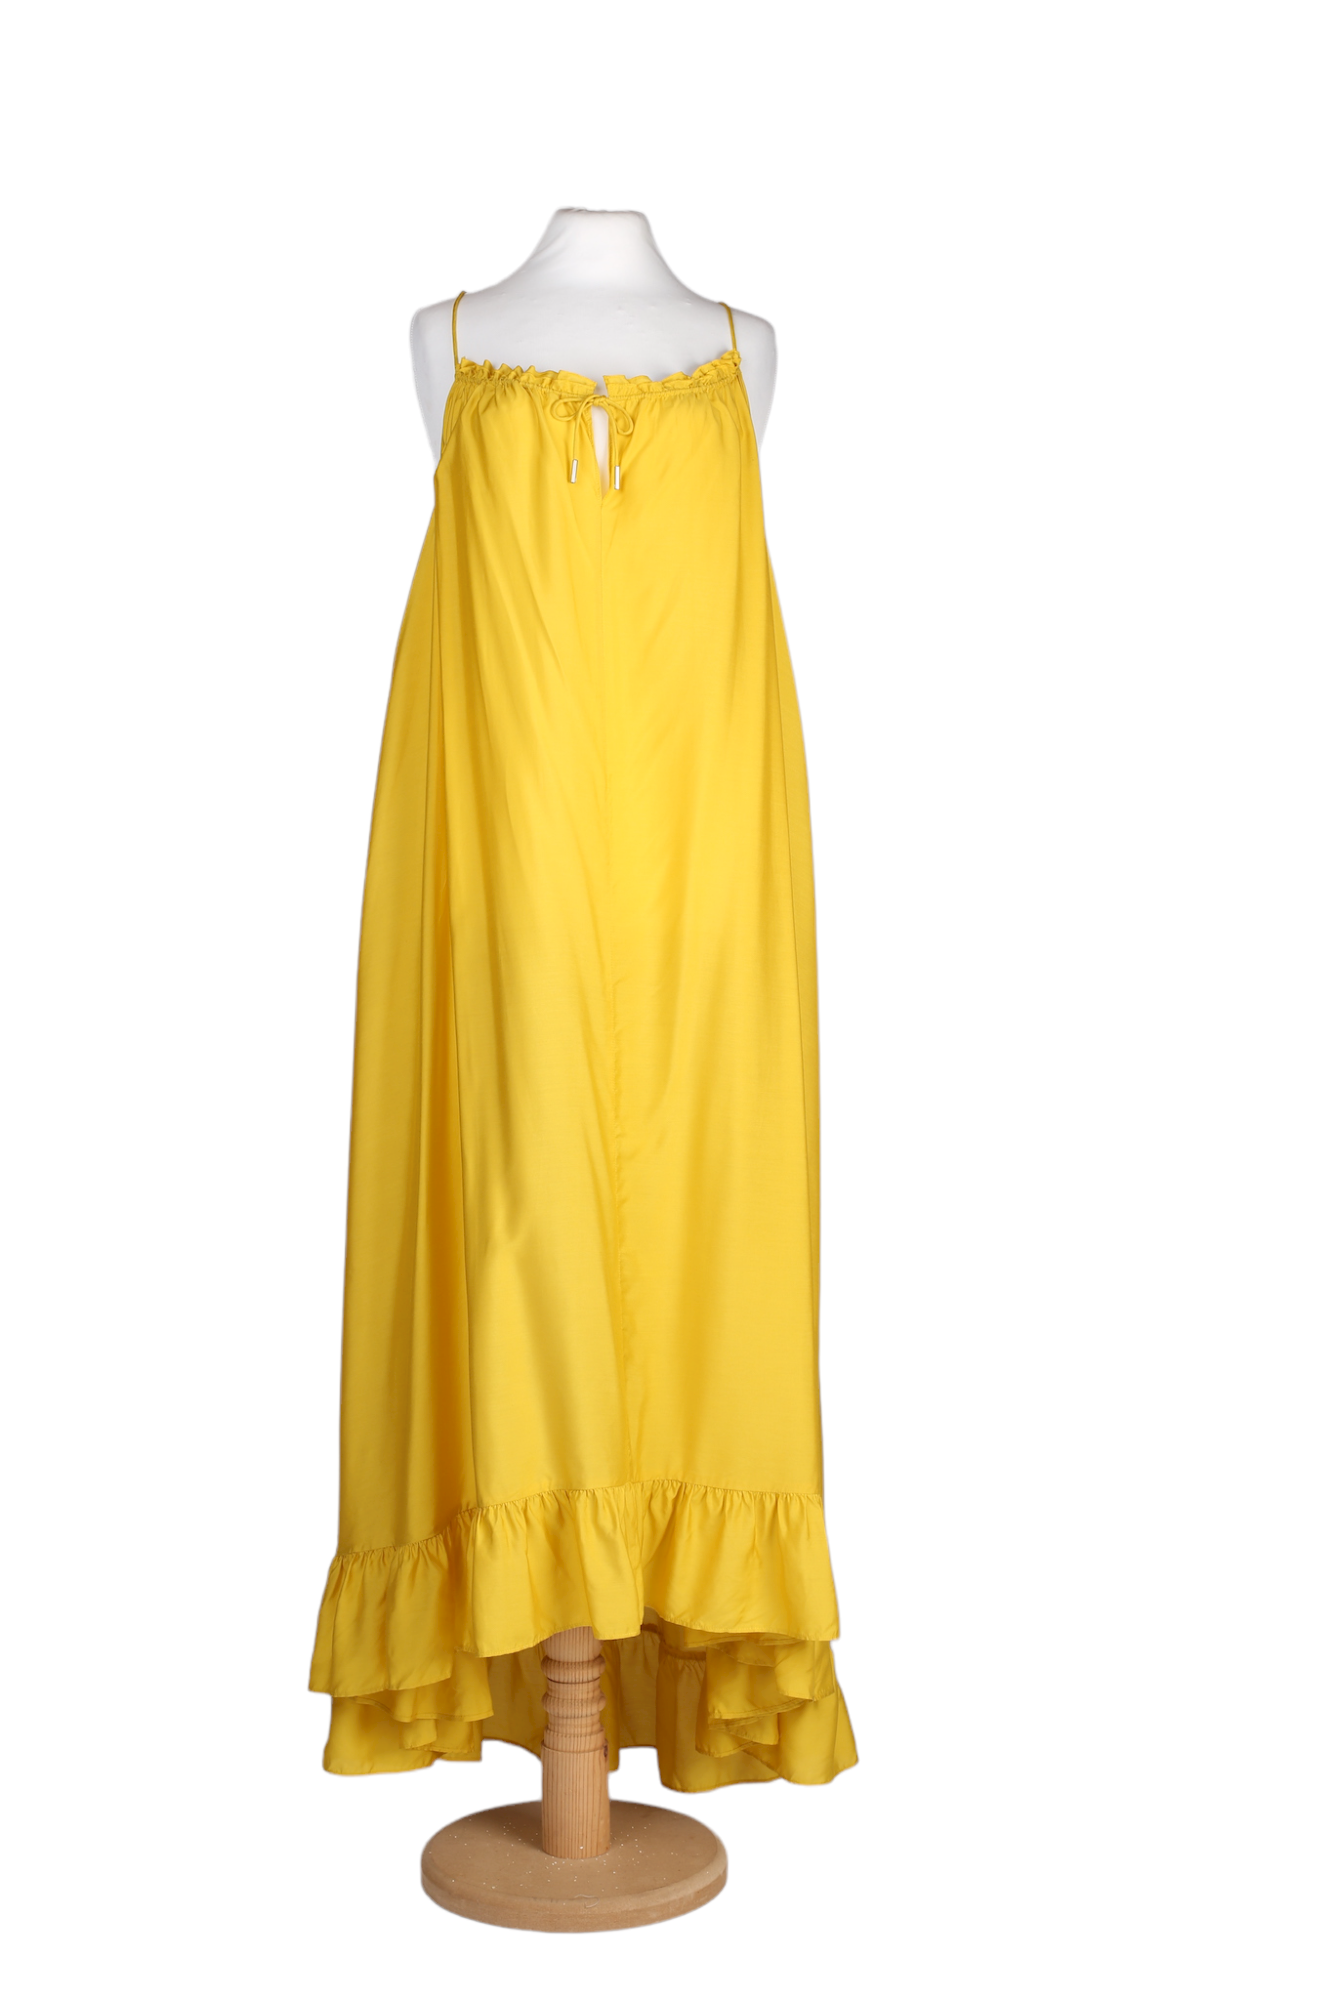 Alice by Temperley Yellow Maxi Summer Dress